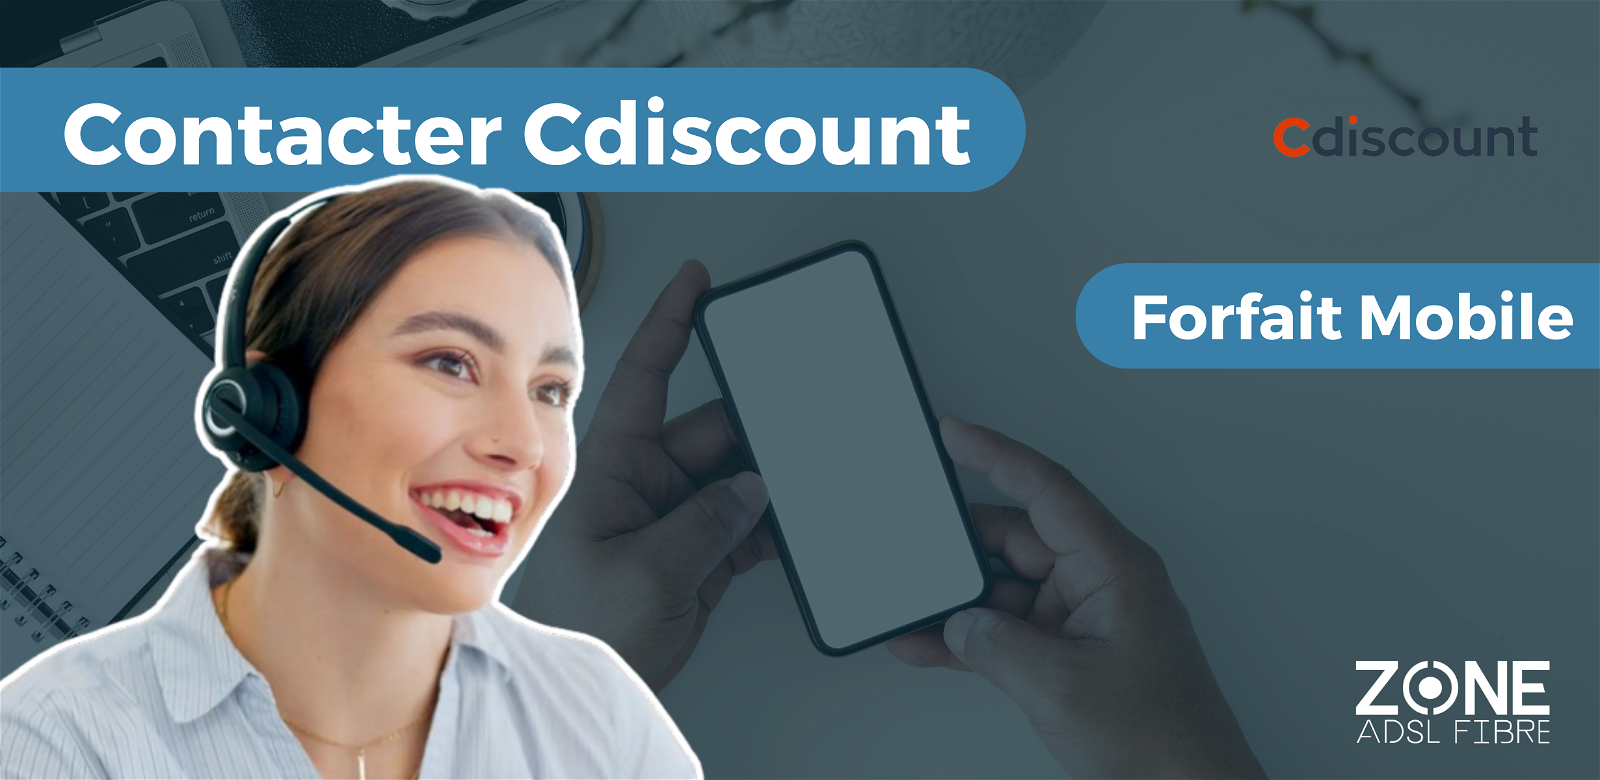 service mobile cdiscount